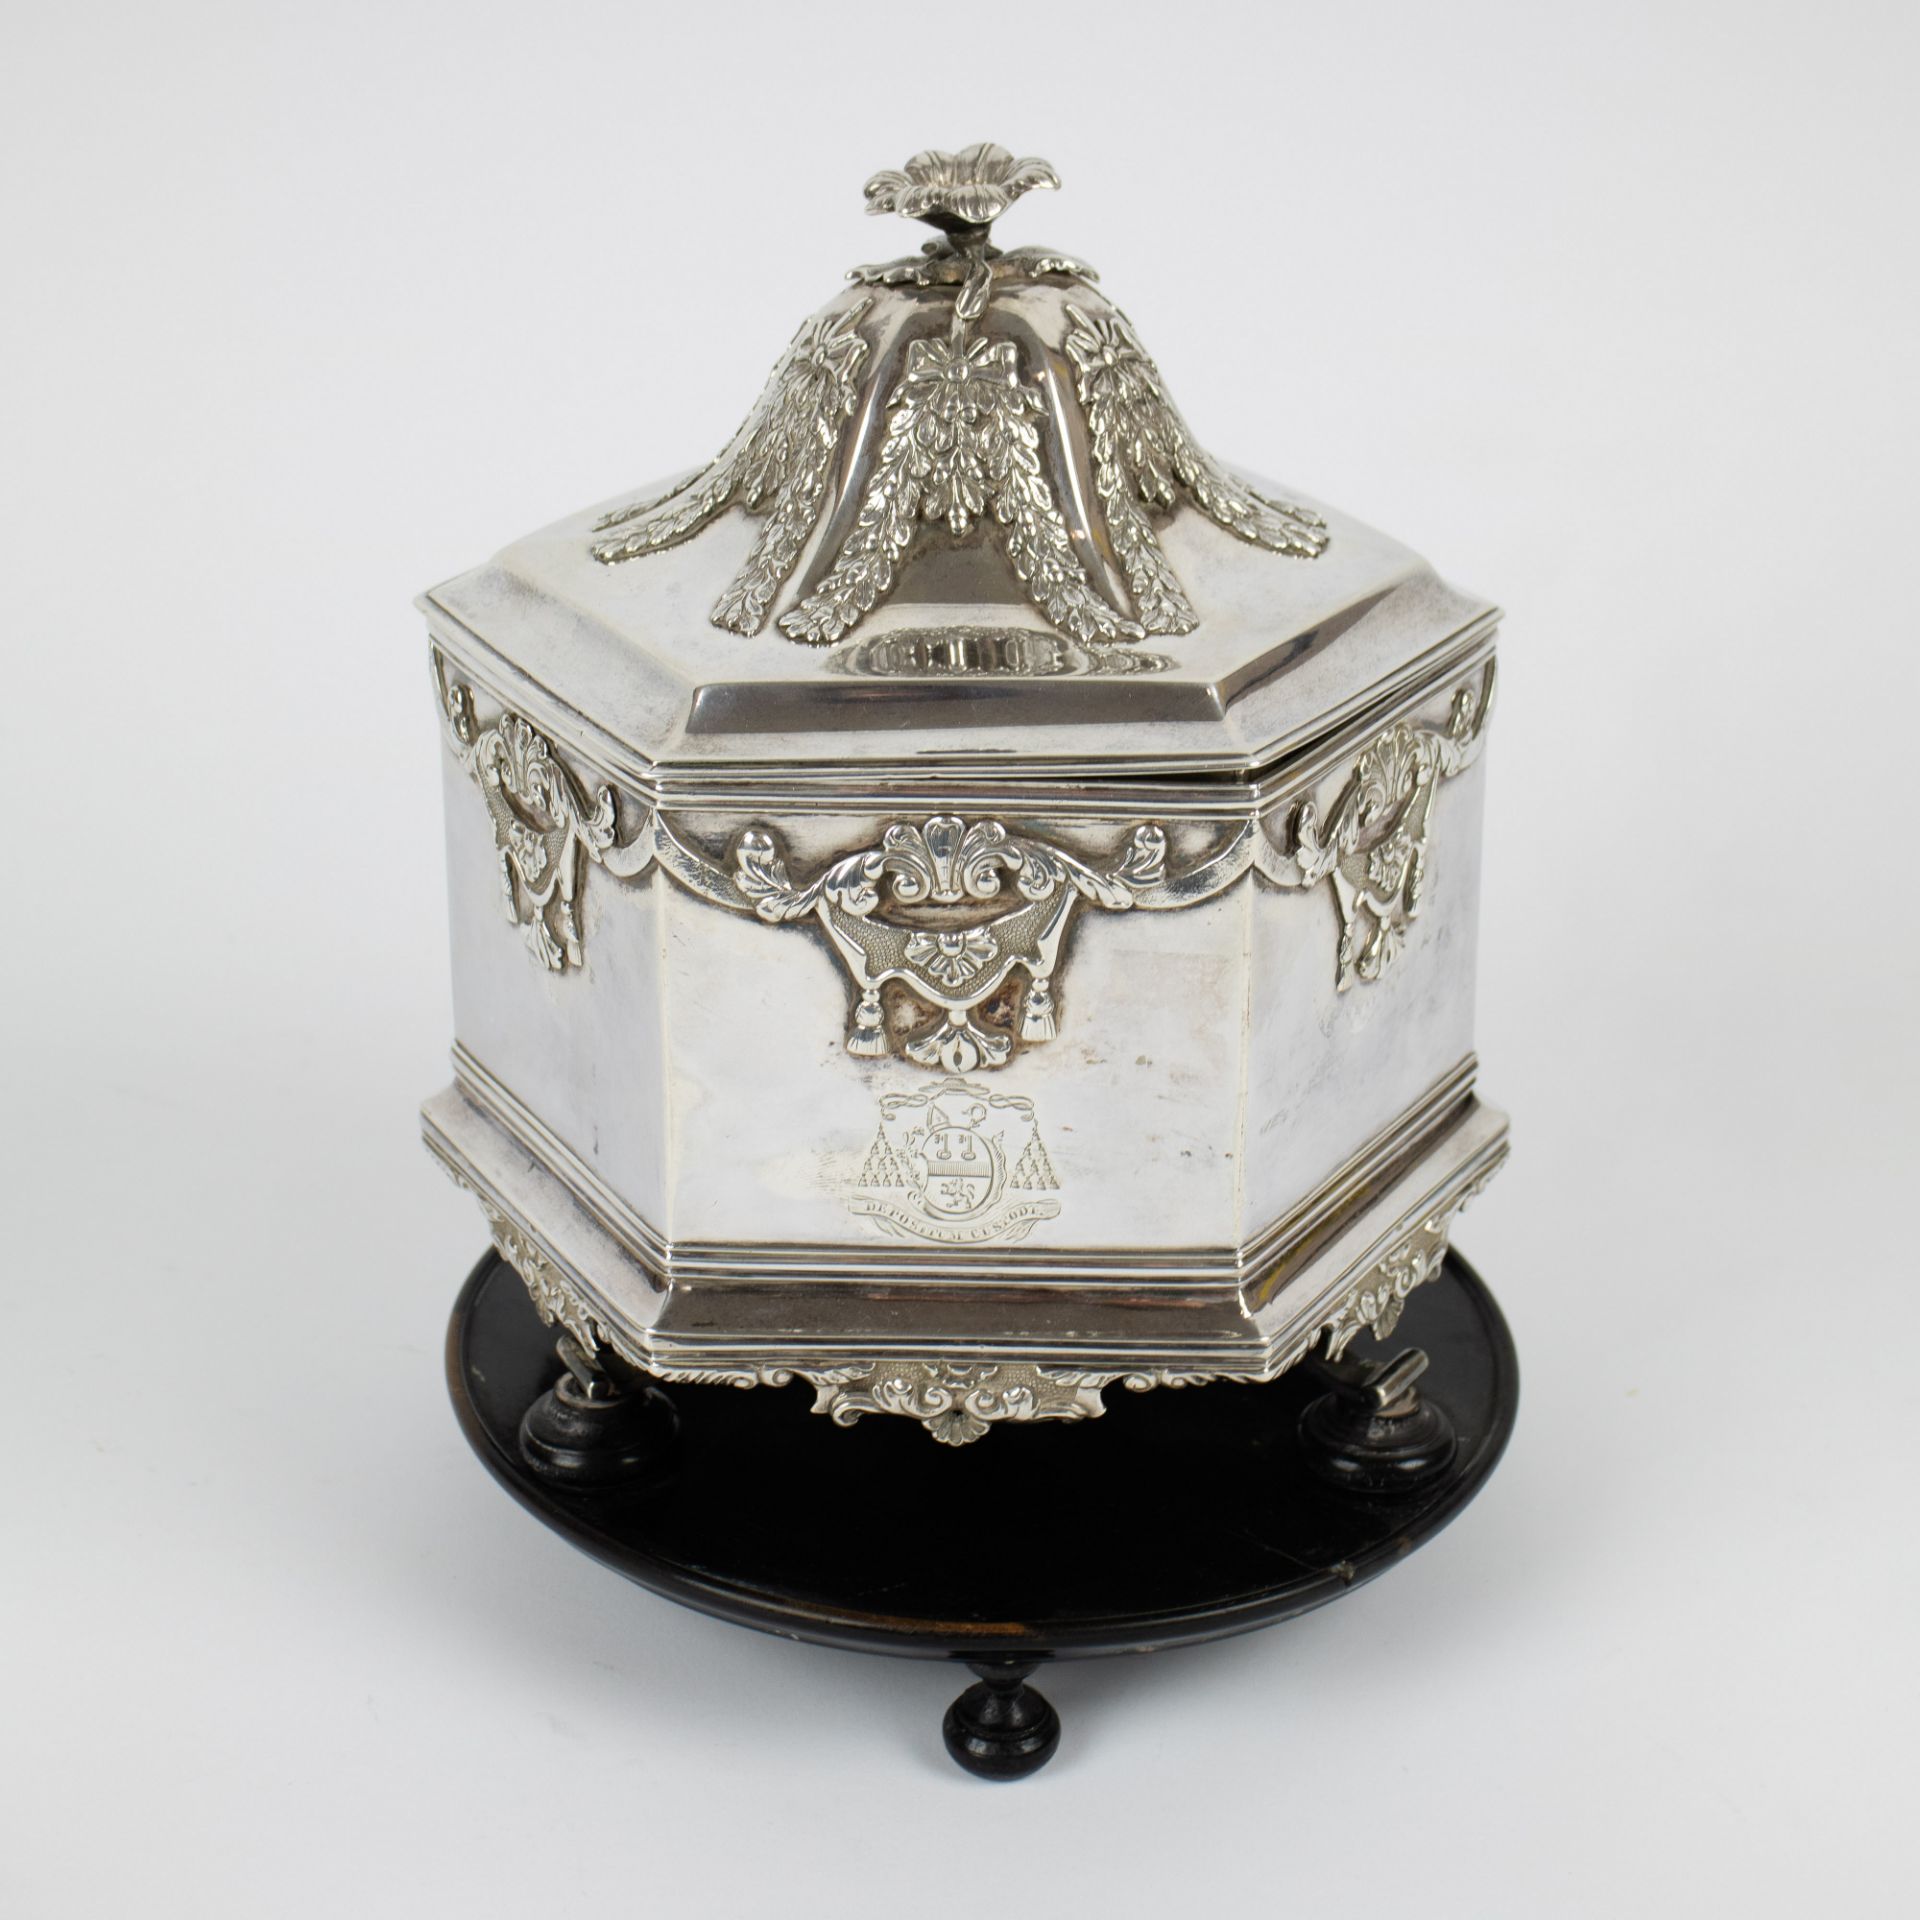 Silver tabaco box Amsterdam 1847 maker Joost Even - Image 2 of 8